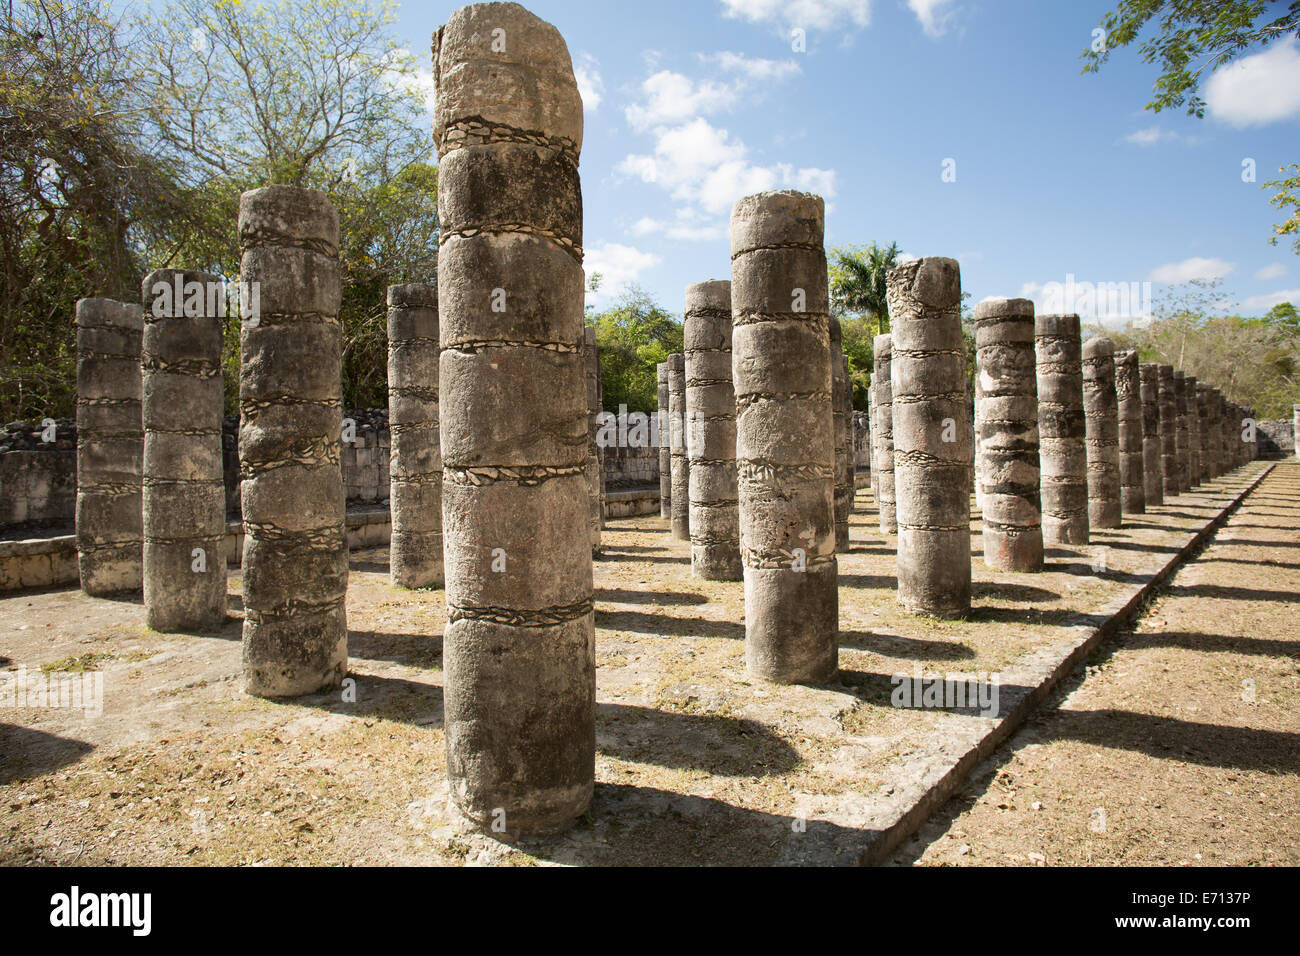 ancient round stone column rows on Mayan archaeological site Stock Photo